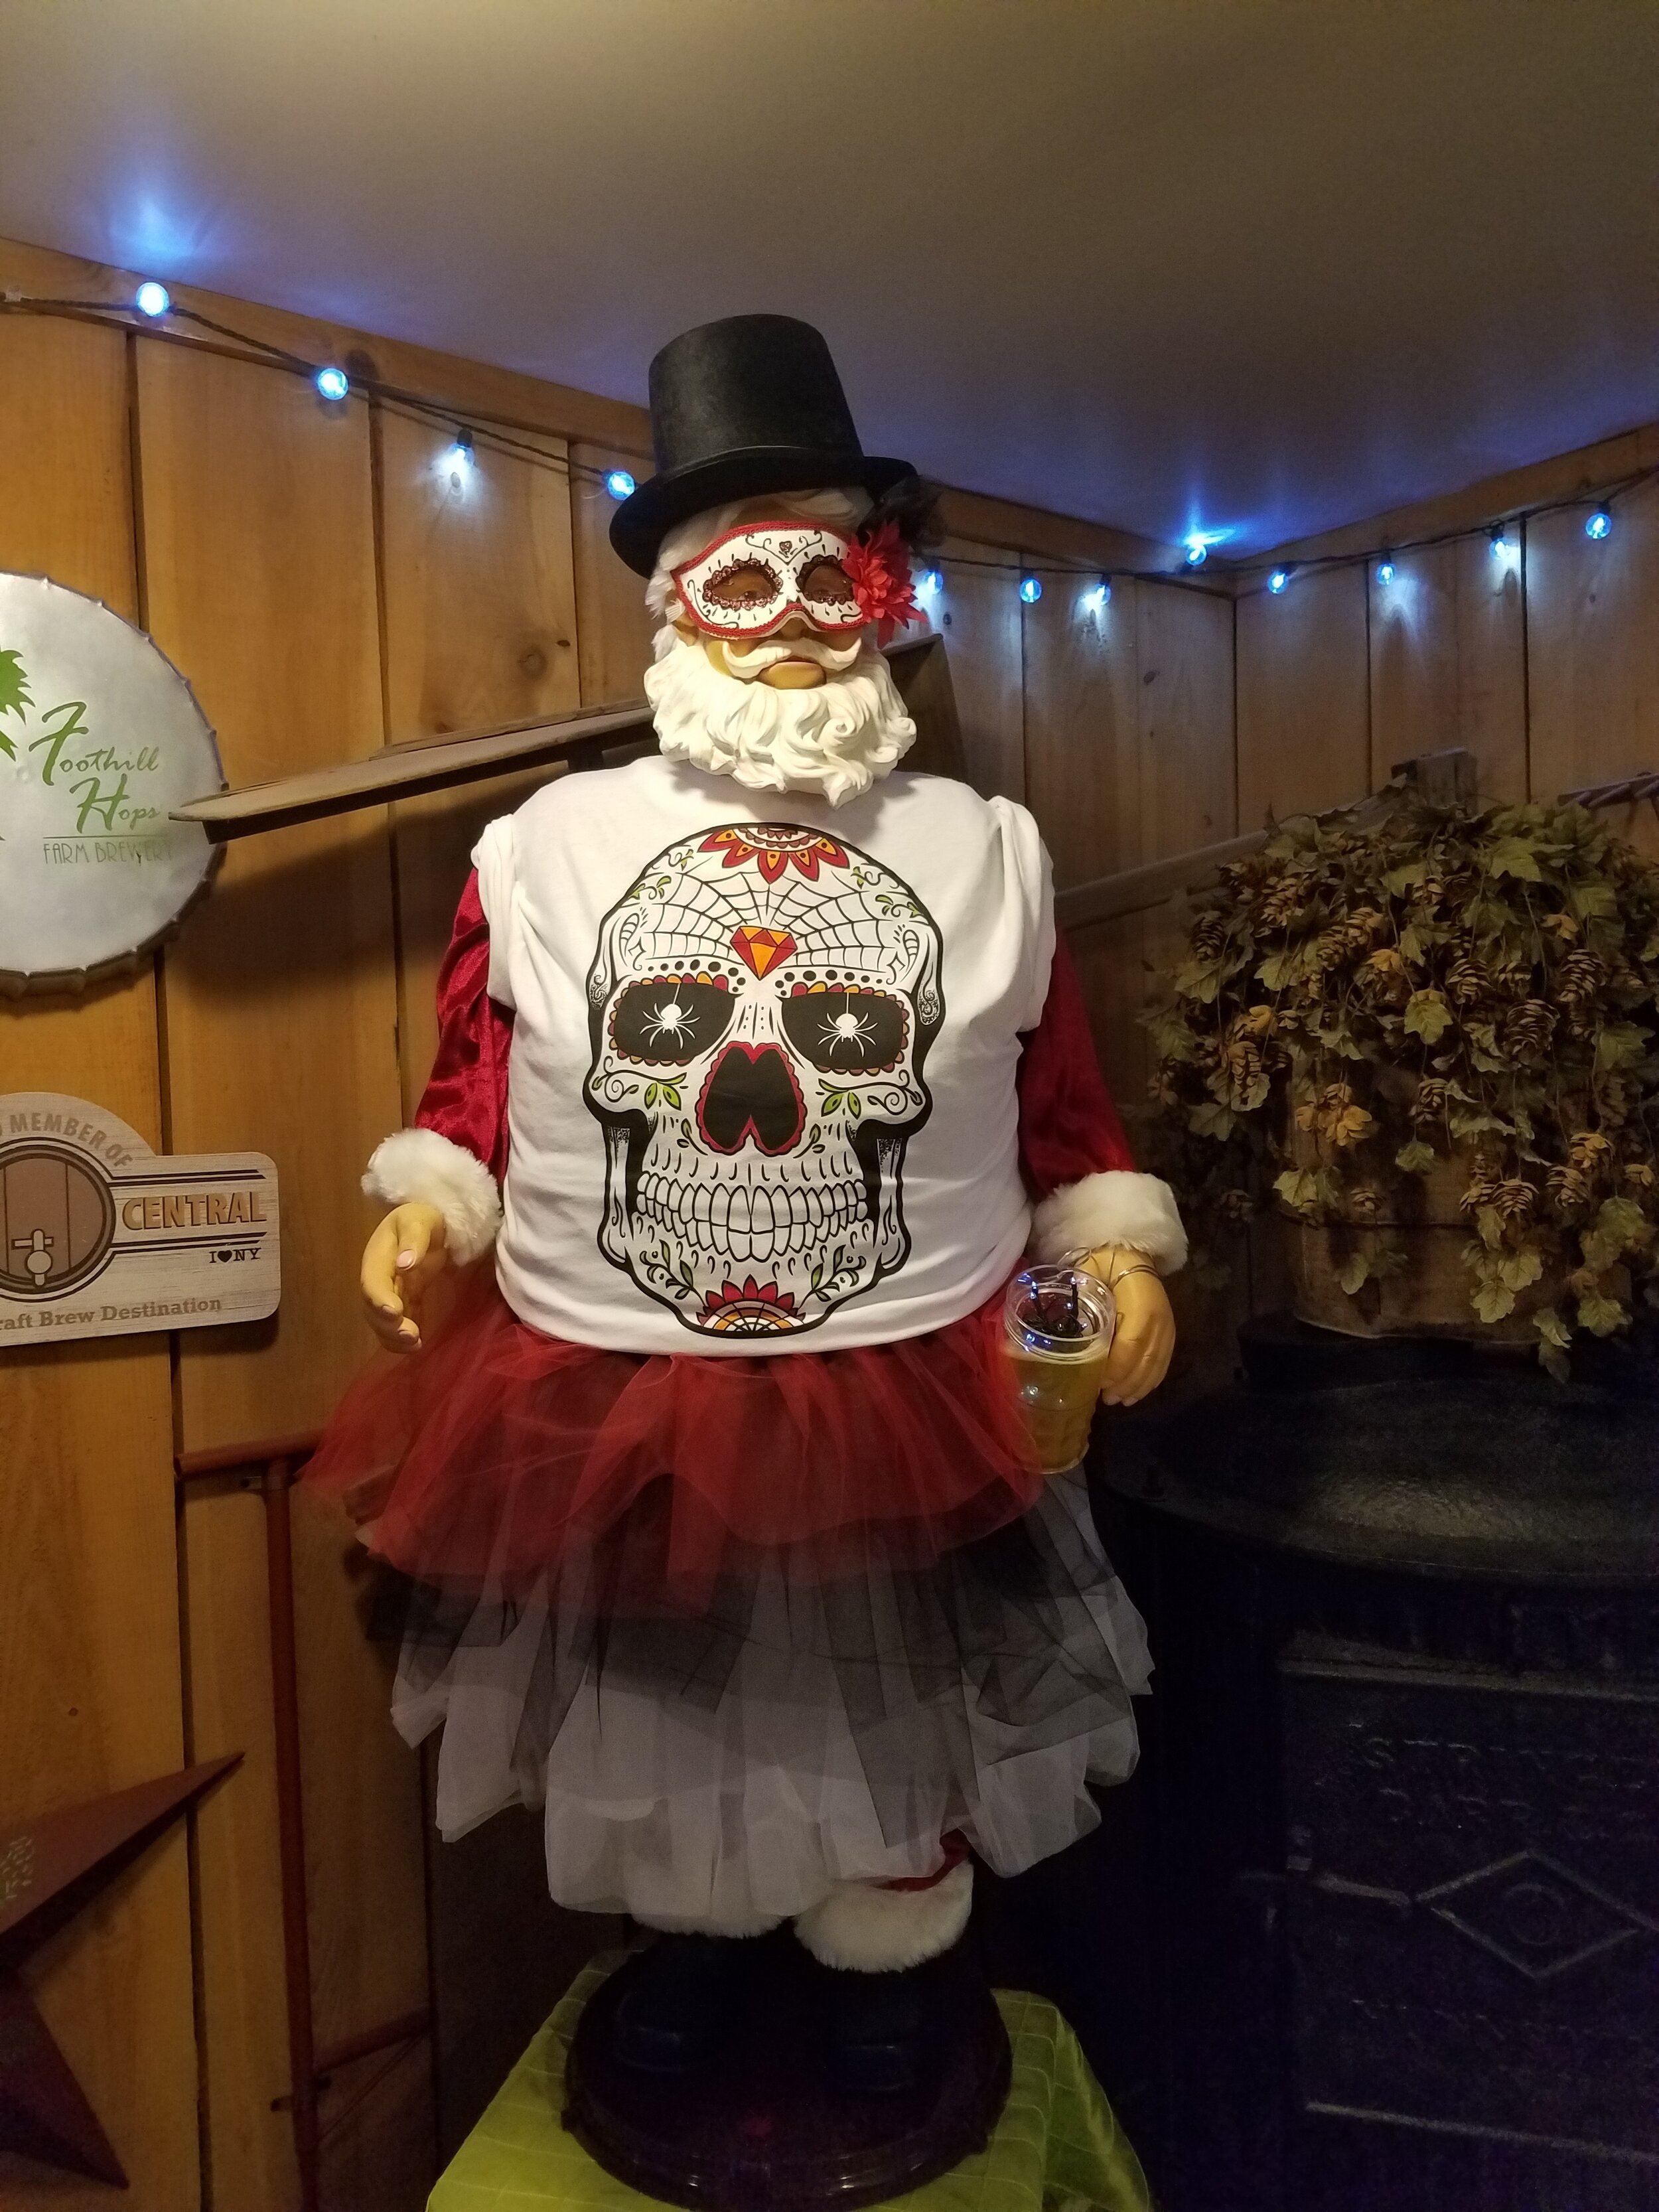 Animated Santa figure dressed for Day of the Dead.of the 